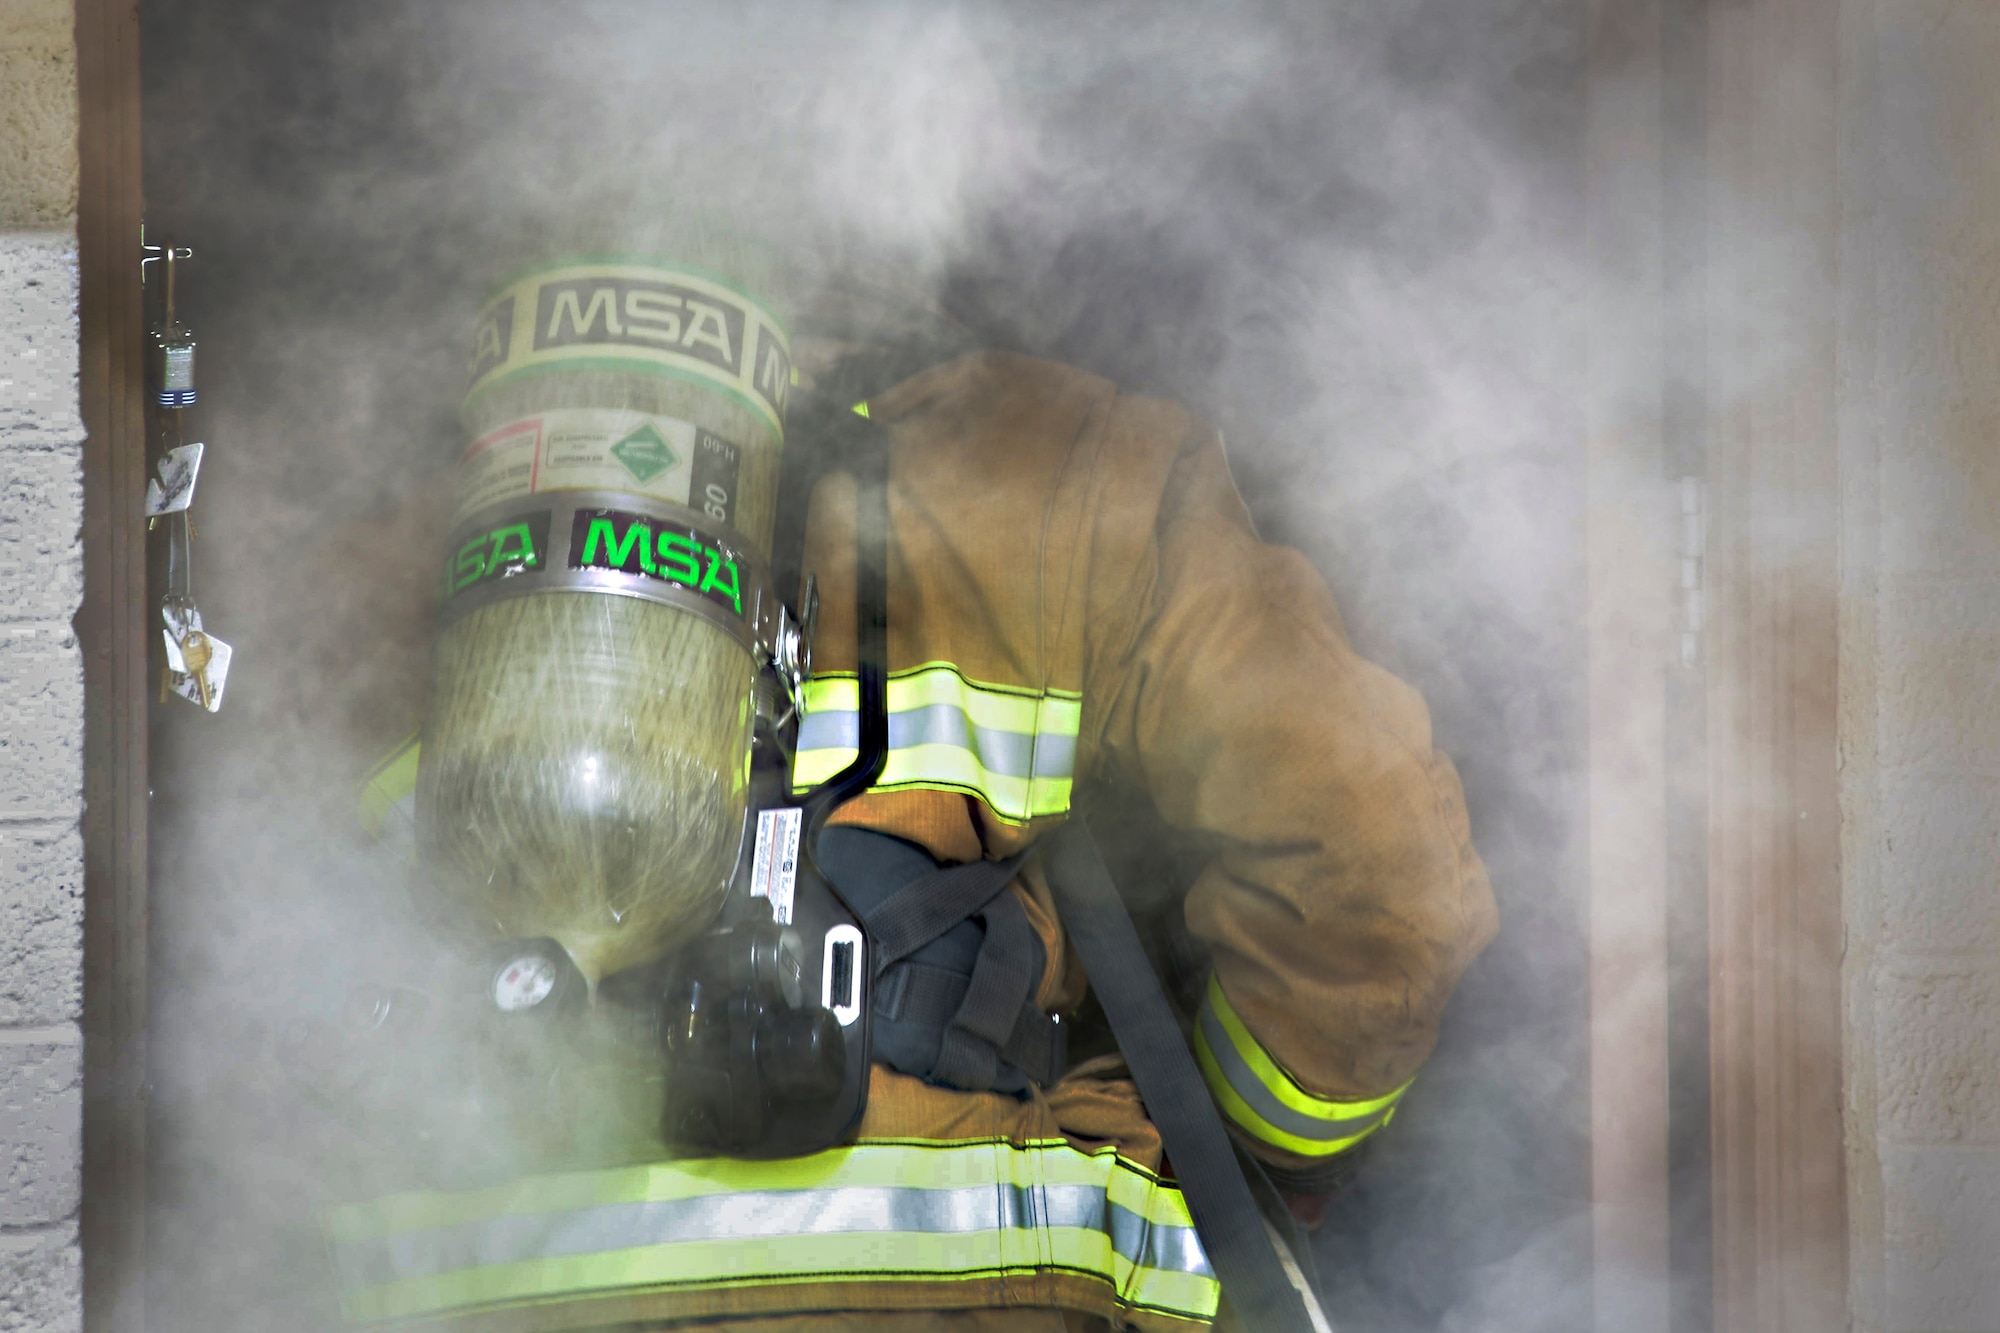 Staff Sgt. Blaine Erway, 99th Civil Engineer Squadron firefighter crew chief, prepares to enter a simulated house fire during Red Flag 17-3 at Nellis Air Force Base, Nev., July 18, 2017. With Red Flag 17-3 in full effect, 99th CES firefighters are in the middle of their busiest time of year. (U.S. Air Force photo by Airman 1st Class Andrew D. Sarver/Released)